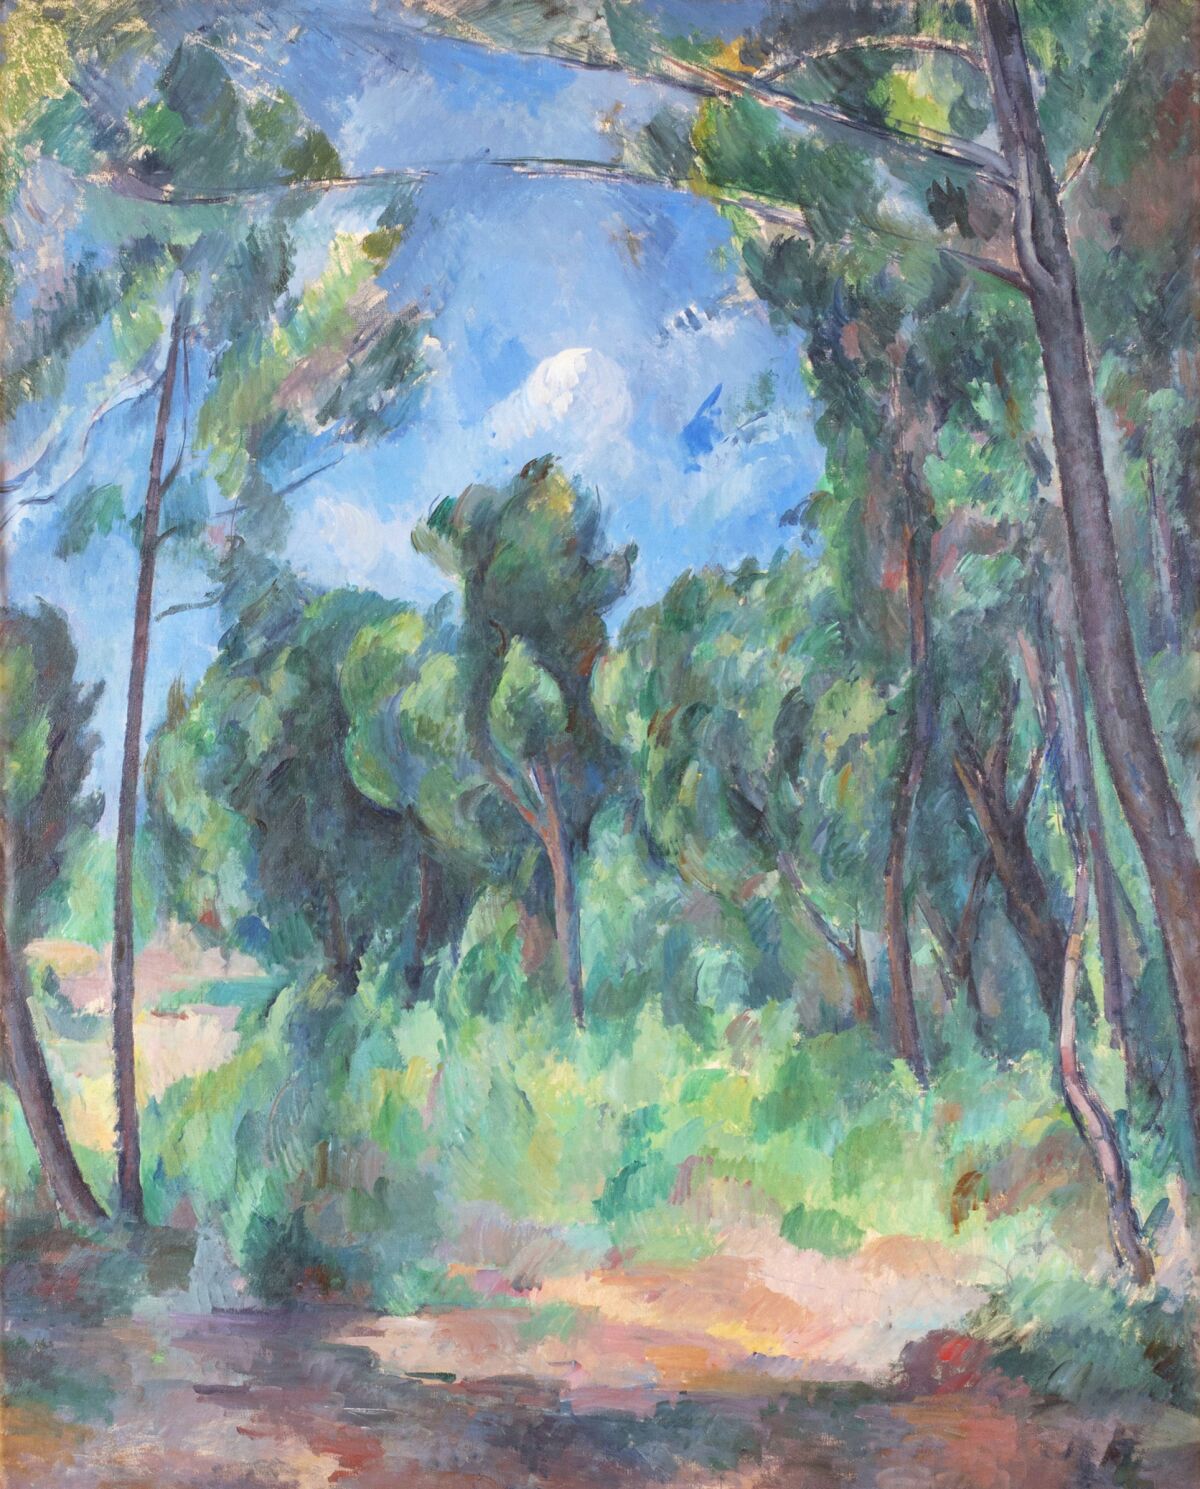 A painting of a forest scene 